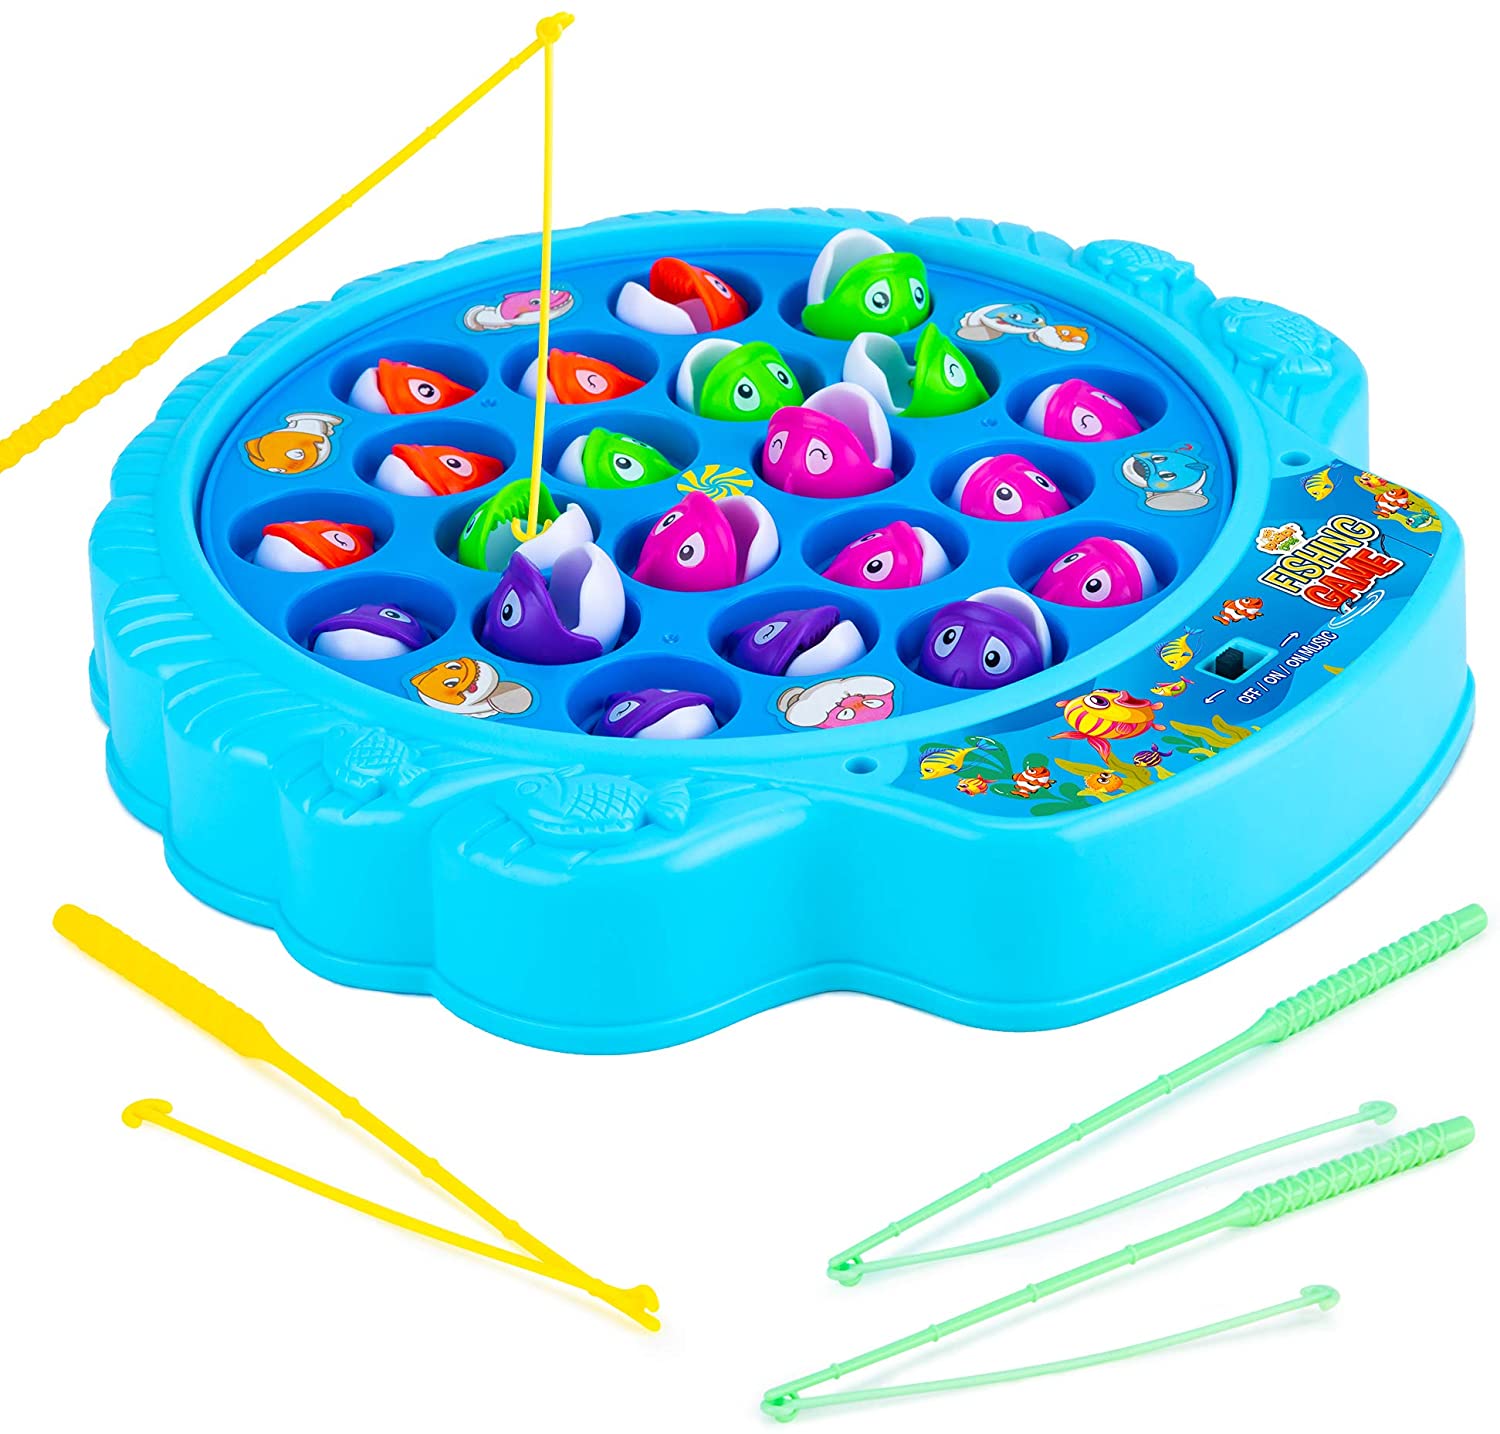  Gamie Wind-Up Fishing Game Set for Kids - Pack of 4 - Each  Rotating Game Includes 8 Toy Fish and 2 Rods - Great Party Favor, Carnival  Prize, Gift for Little